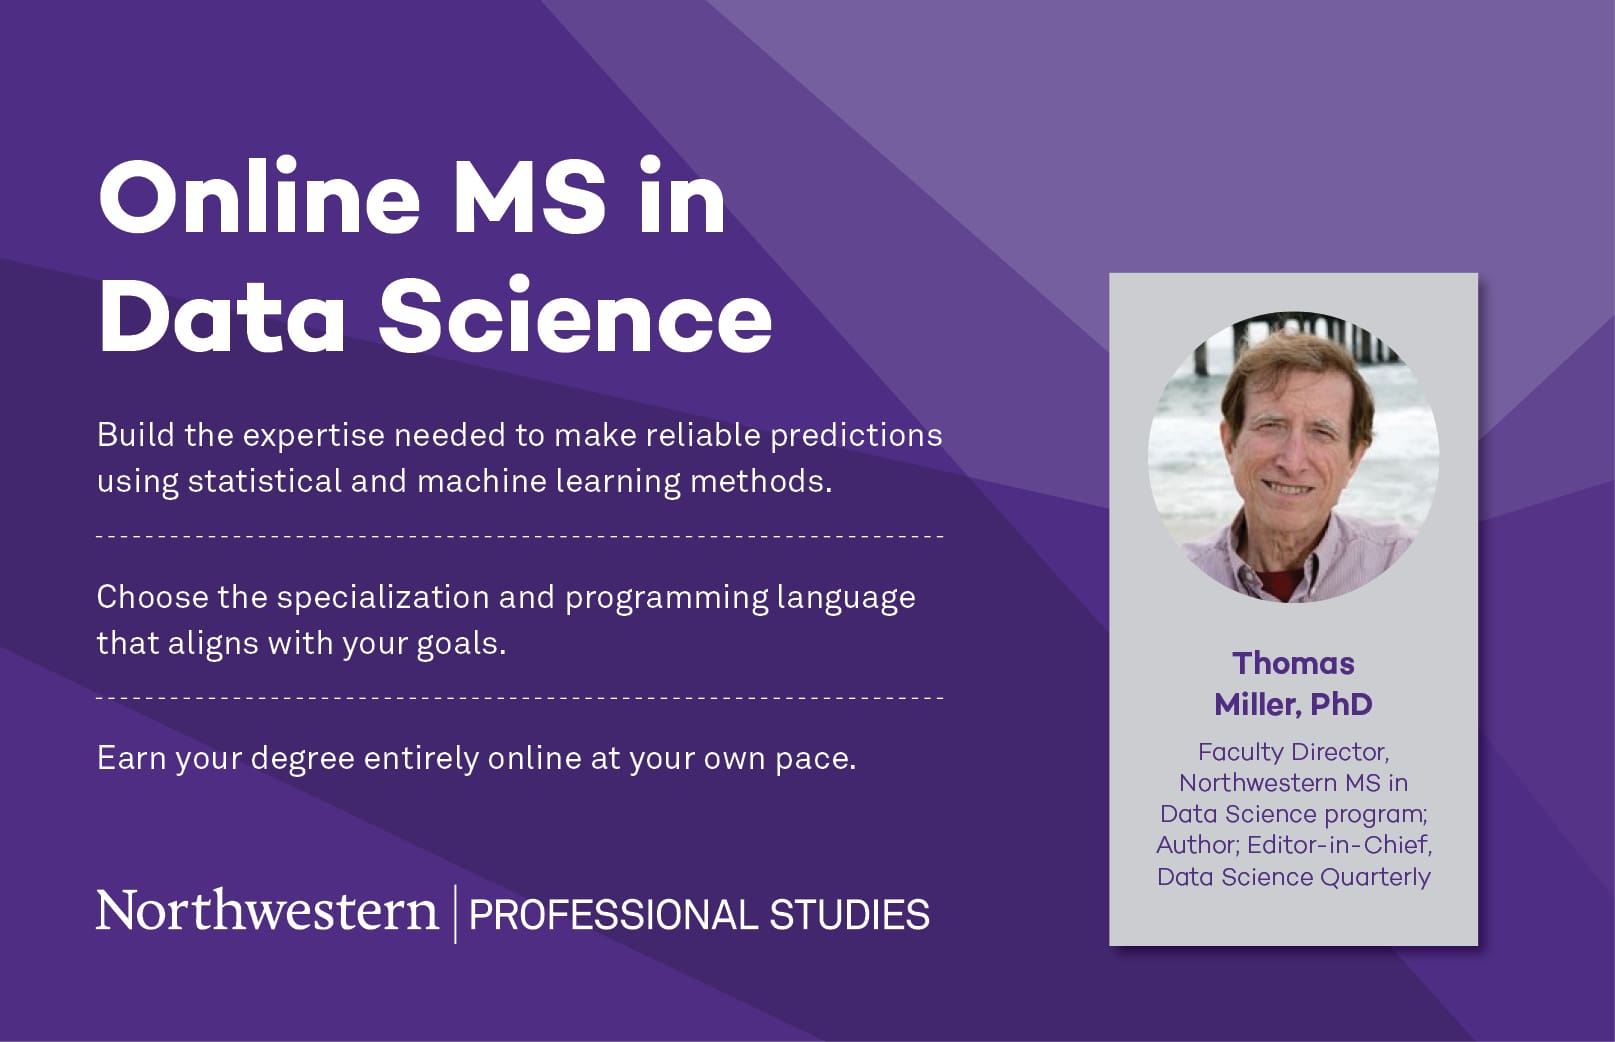 Mastering Data Science: Northwestern University Offers Flexible, Industry-Leading Online MS Program with Diverse Specializations